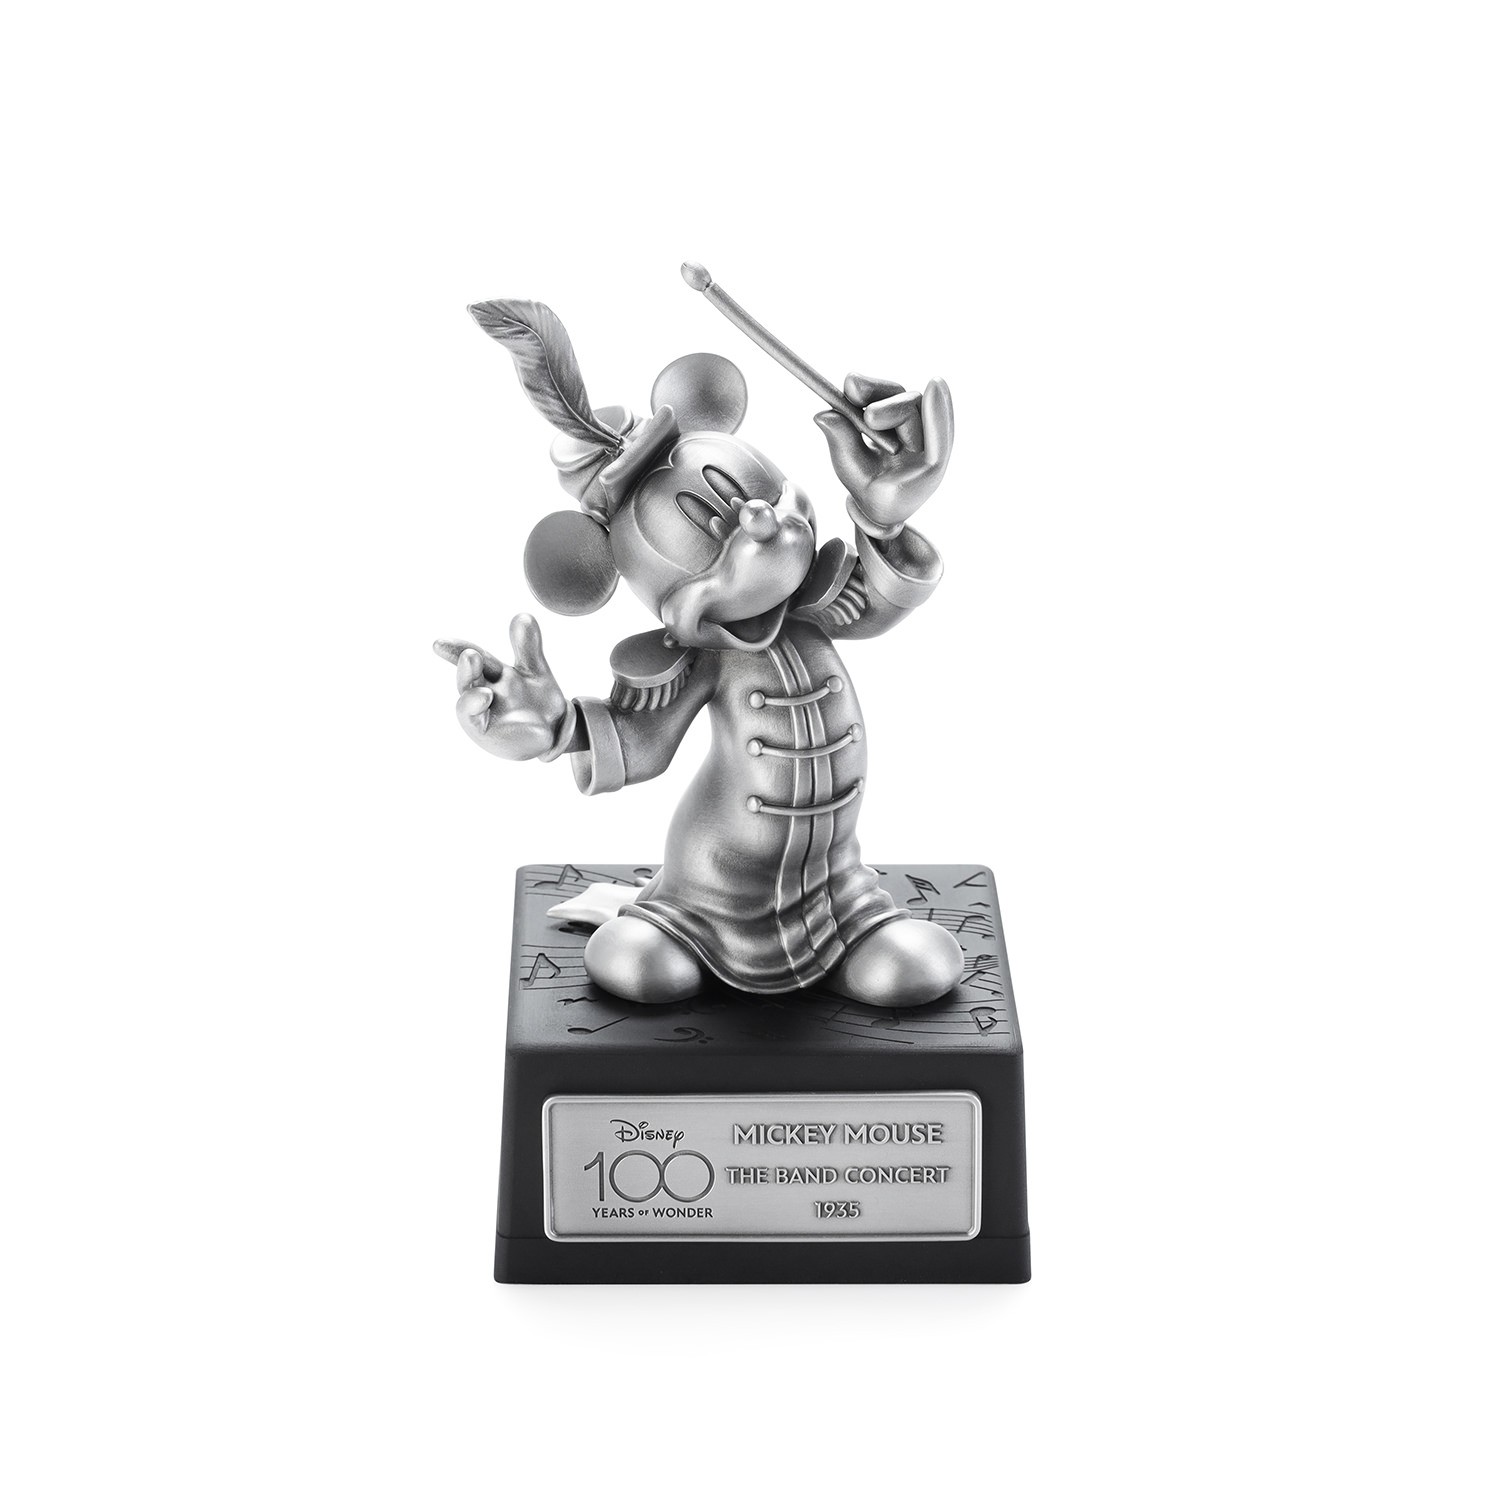 Mickey Mouse 1935 Figurine (Prototype Shown) View 1